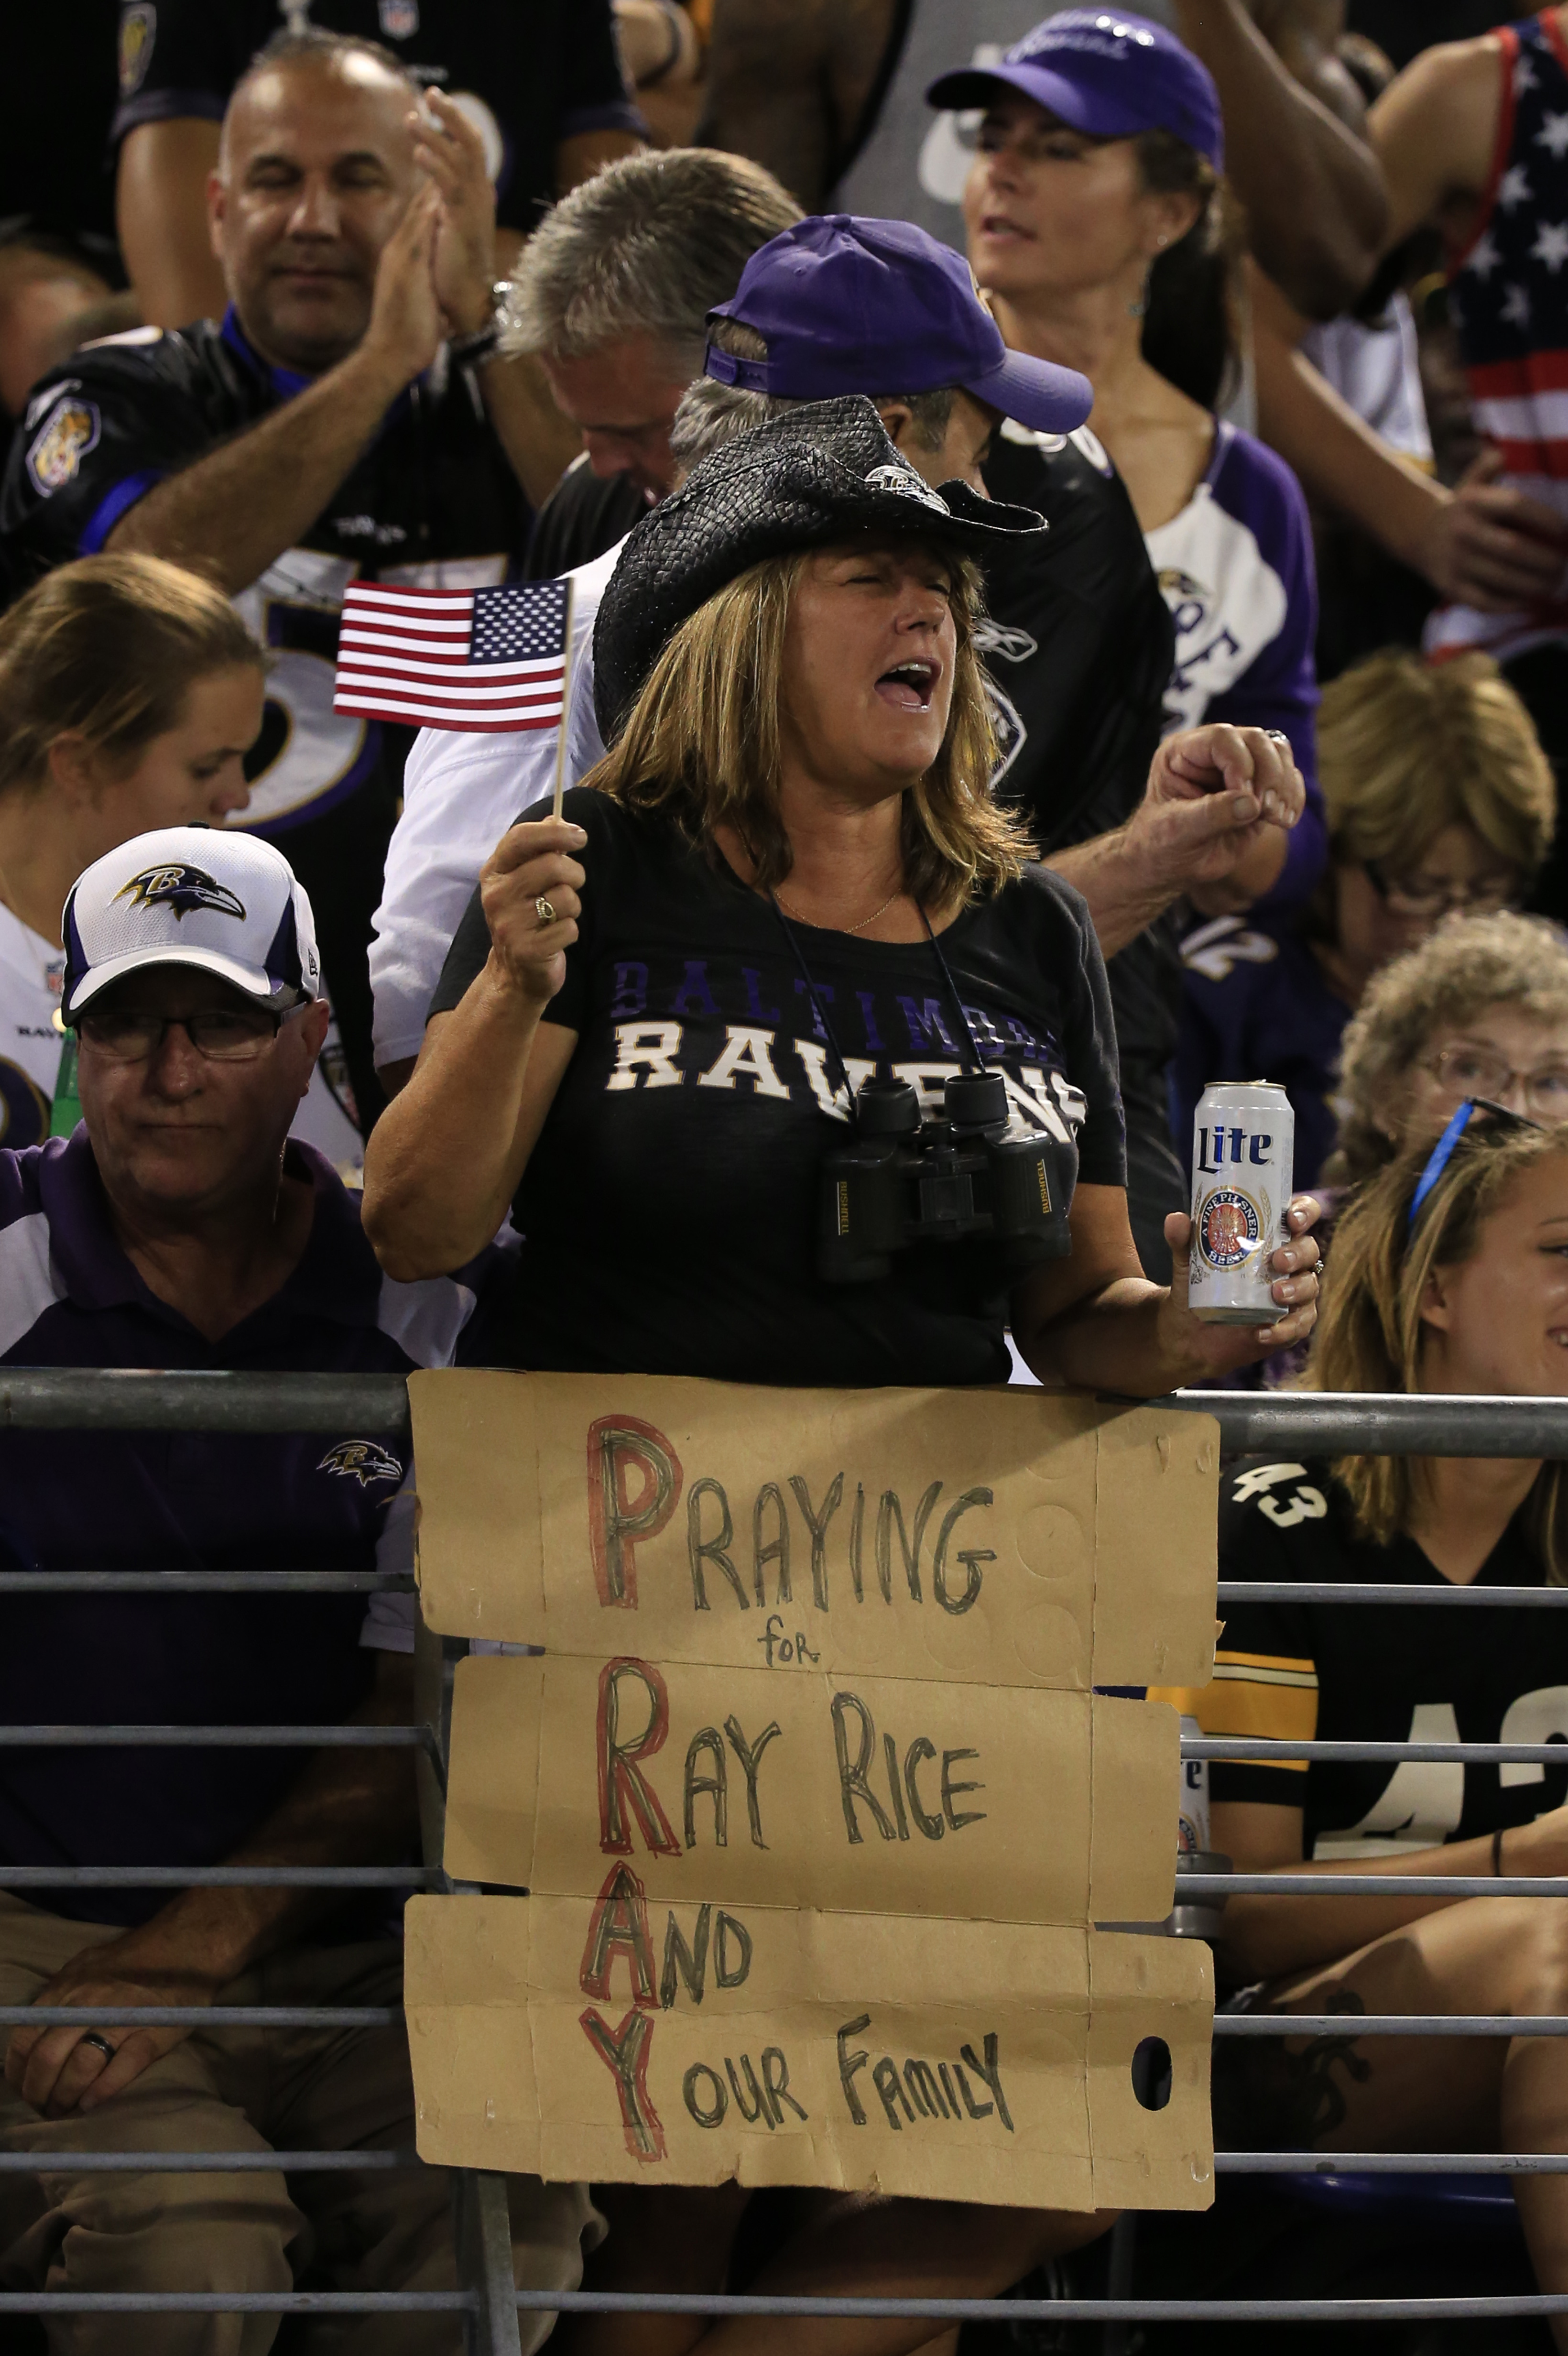 A Baltimore Ravens fan shows her support for Ray Rice on September 11, 2014. (Photo by Rob Carr/Getty Images)